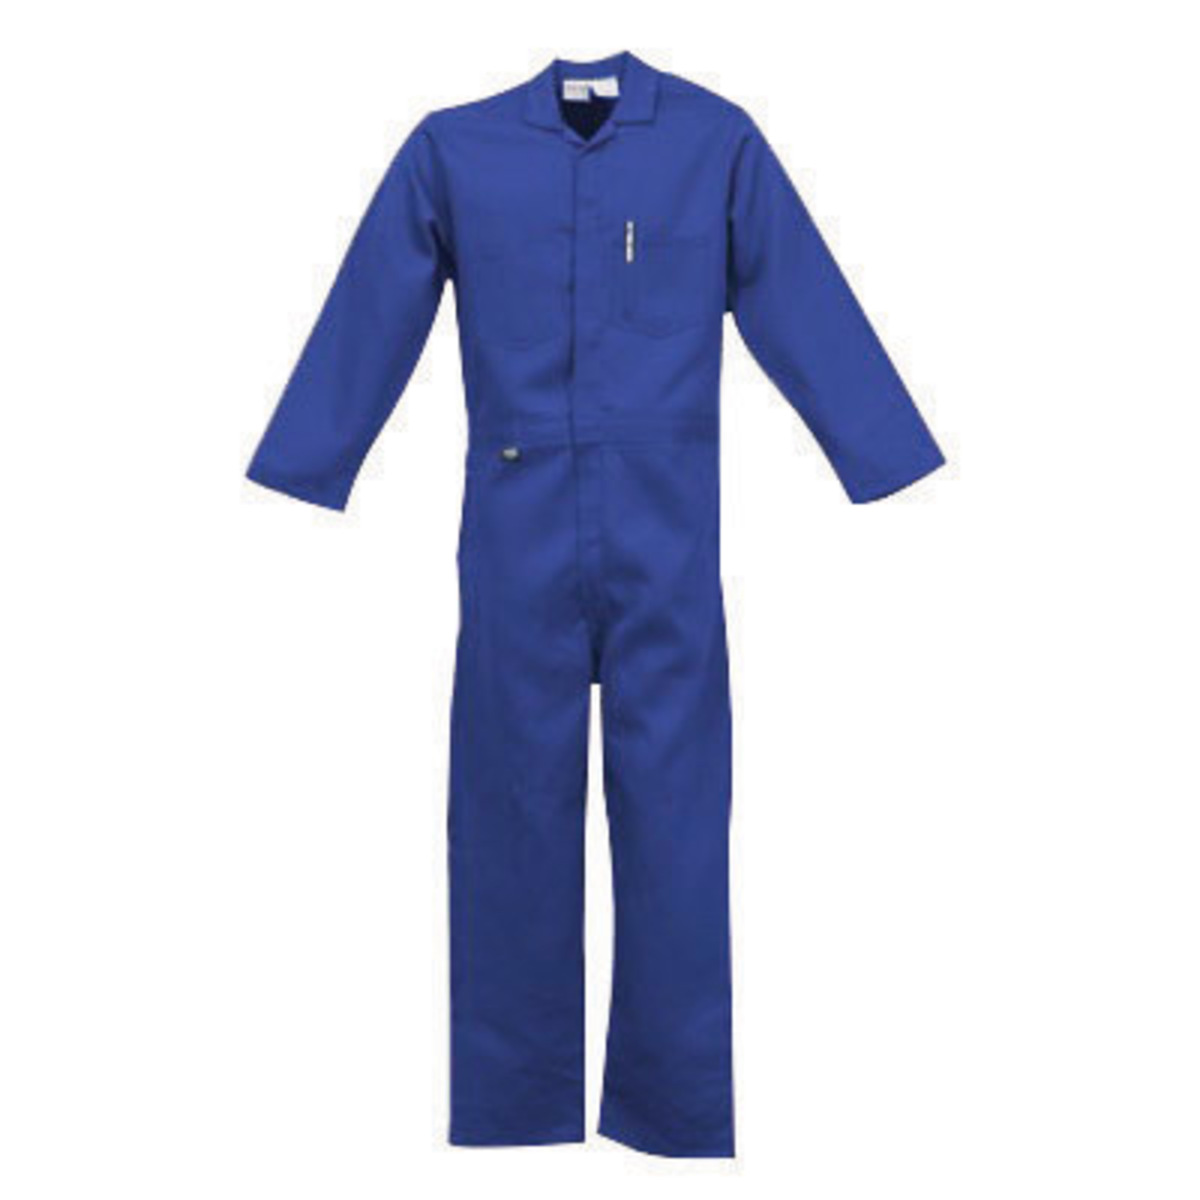 Stanco Safety Products™ X-Large Tall Navy Blue Nomex® IIIA Arc Rated Flame Resistant Coveralls With Front Zipper Closure And 1 (